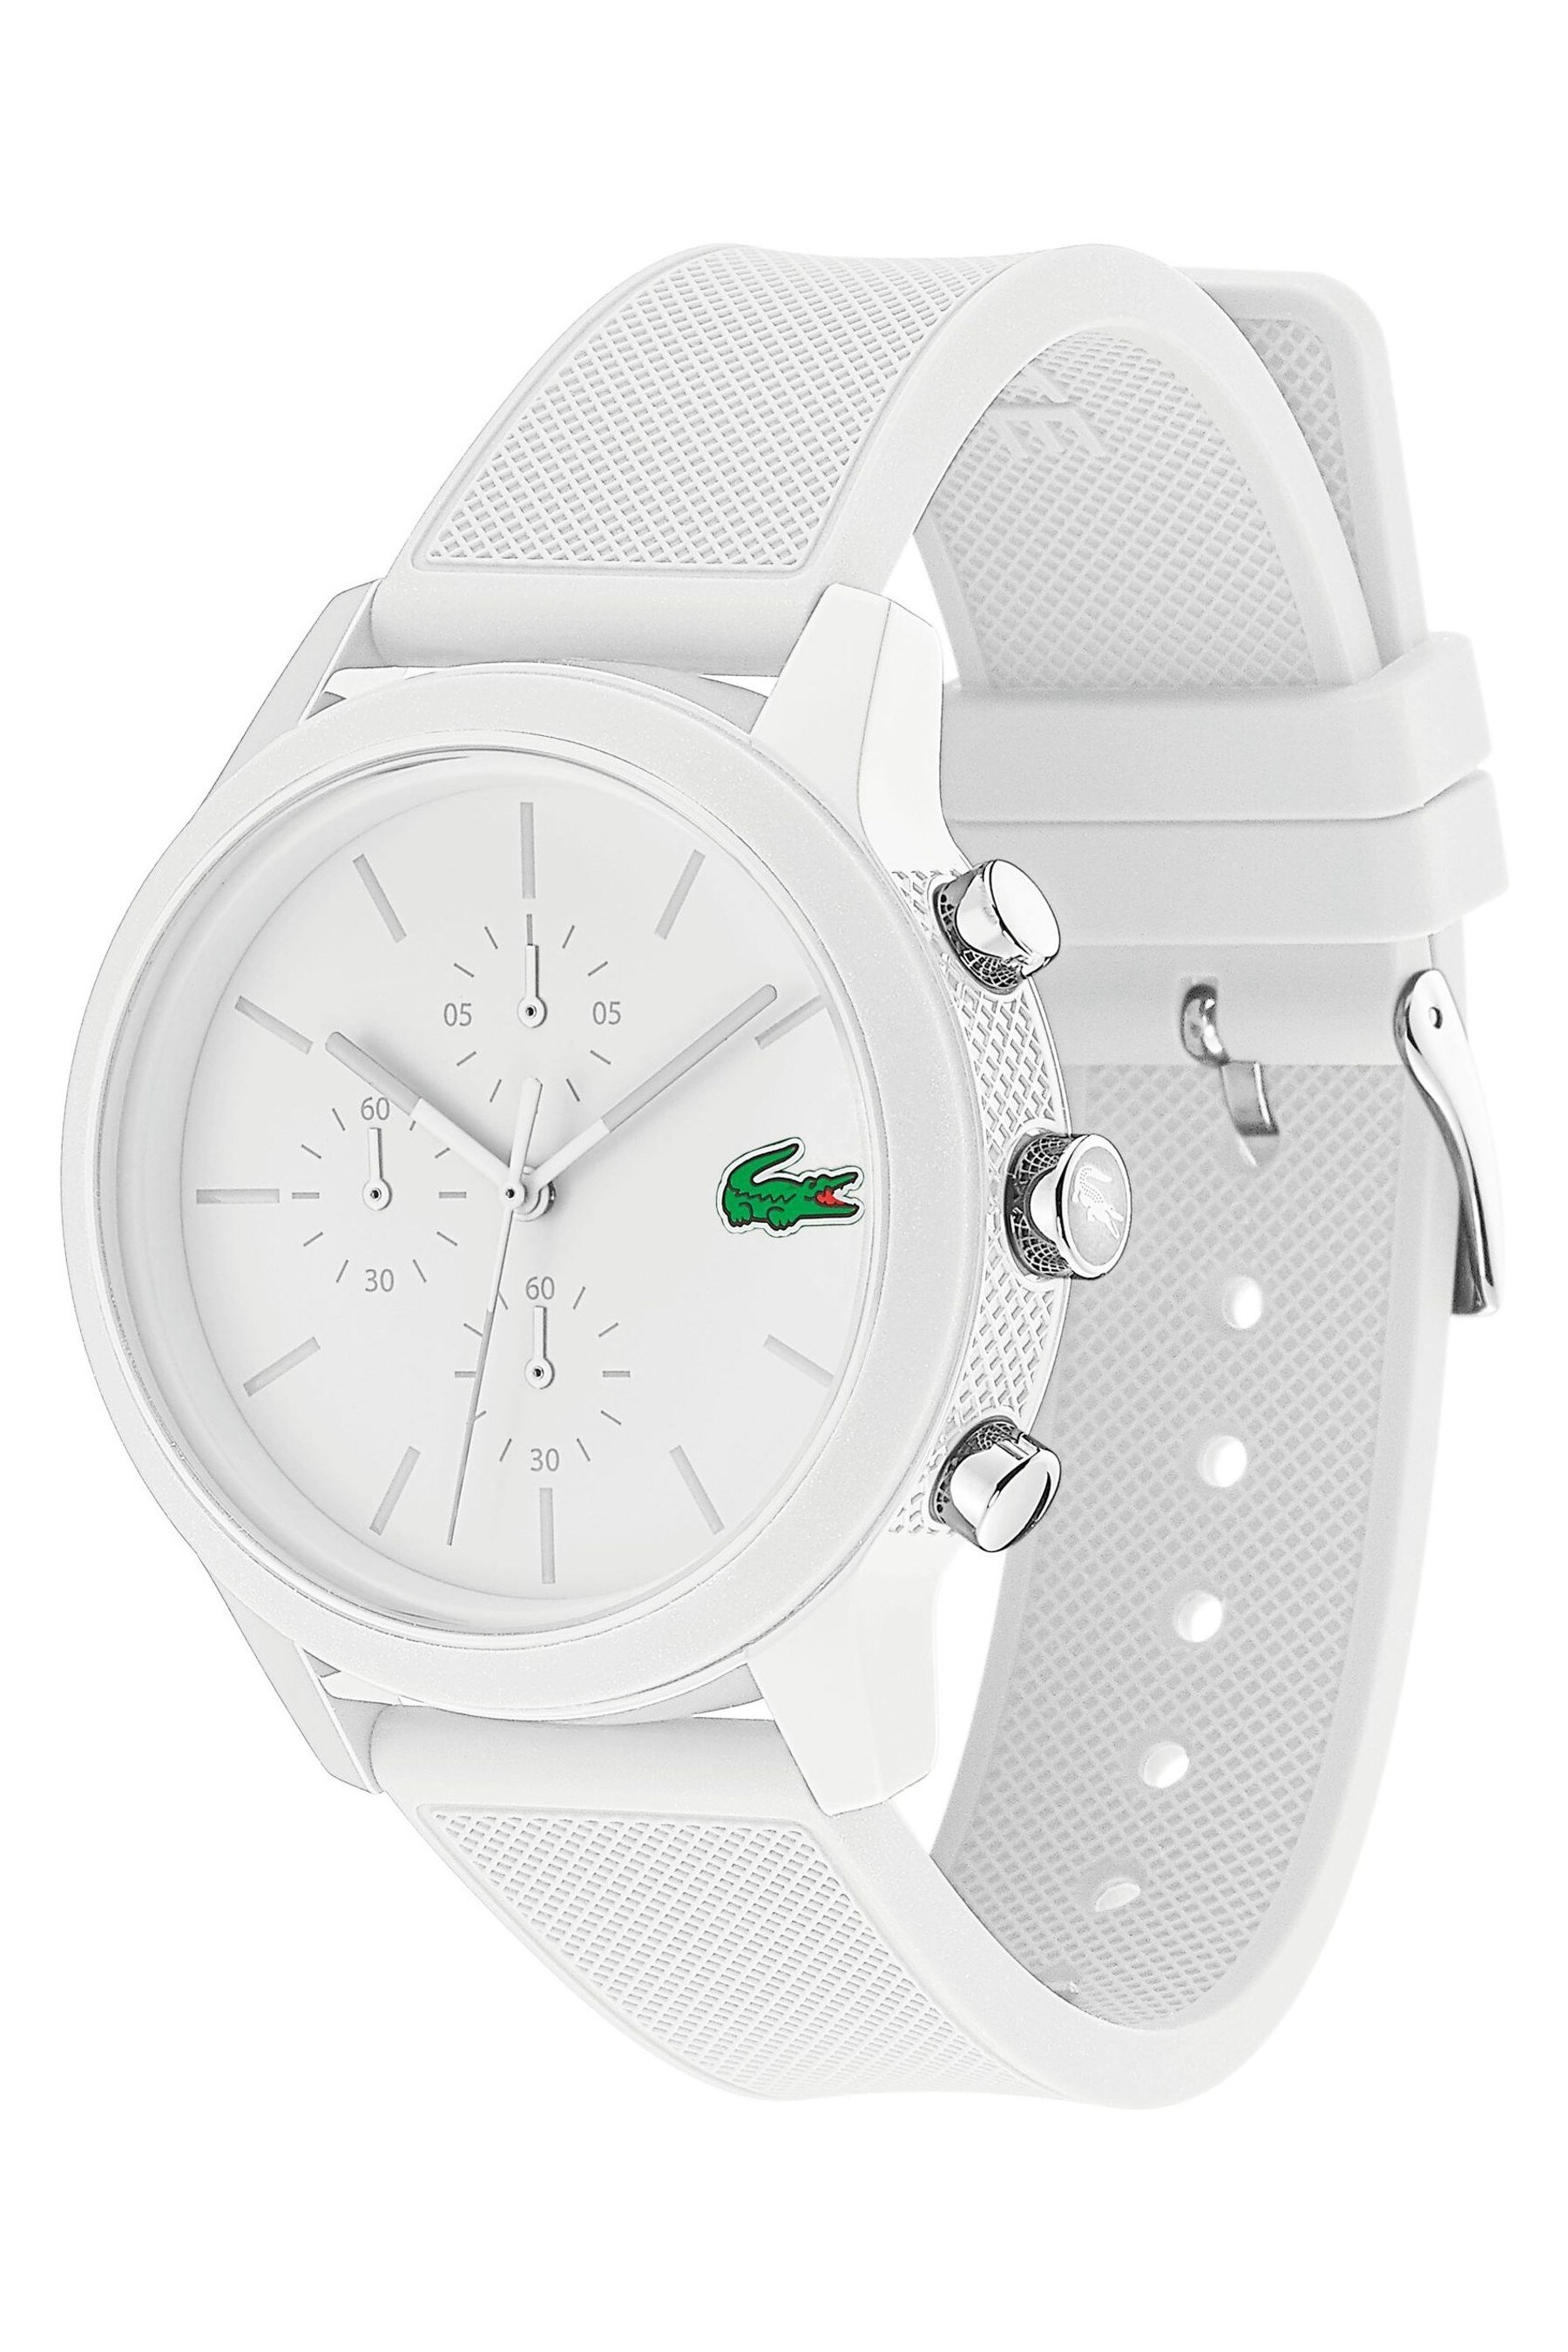 Buy Lacoste.12.12 White Silicone Watch from the Next UK online shop